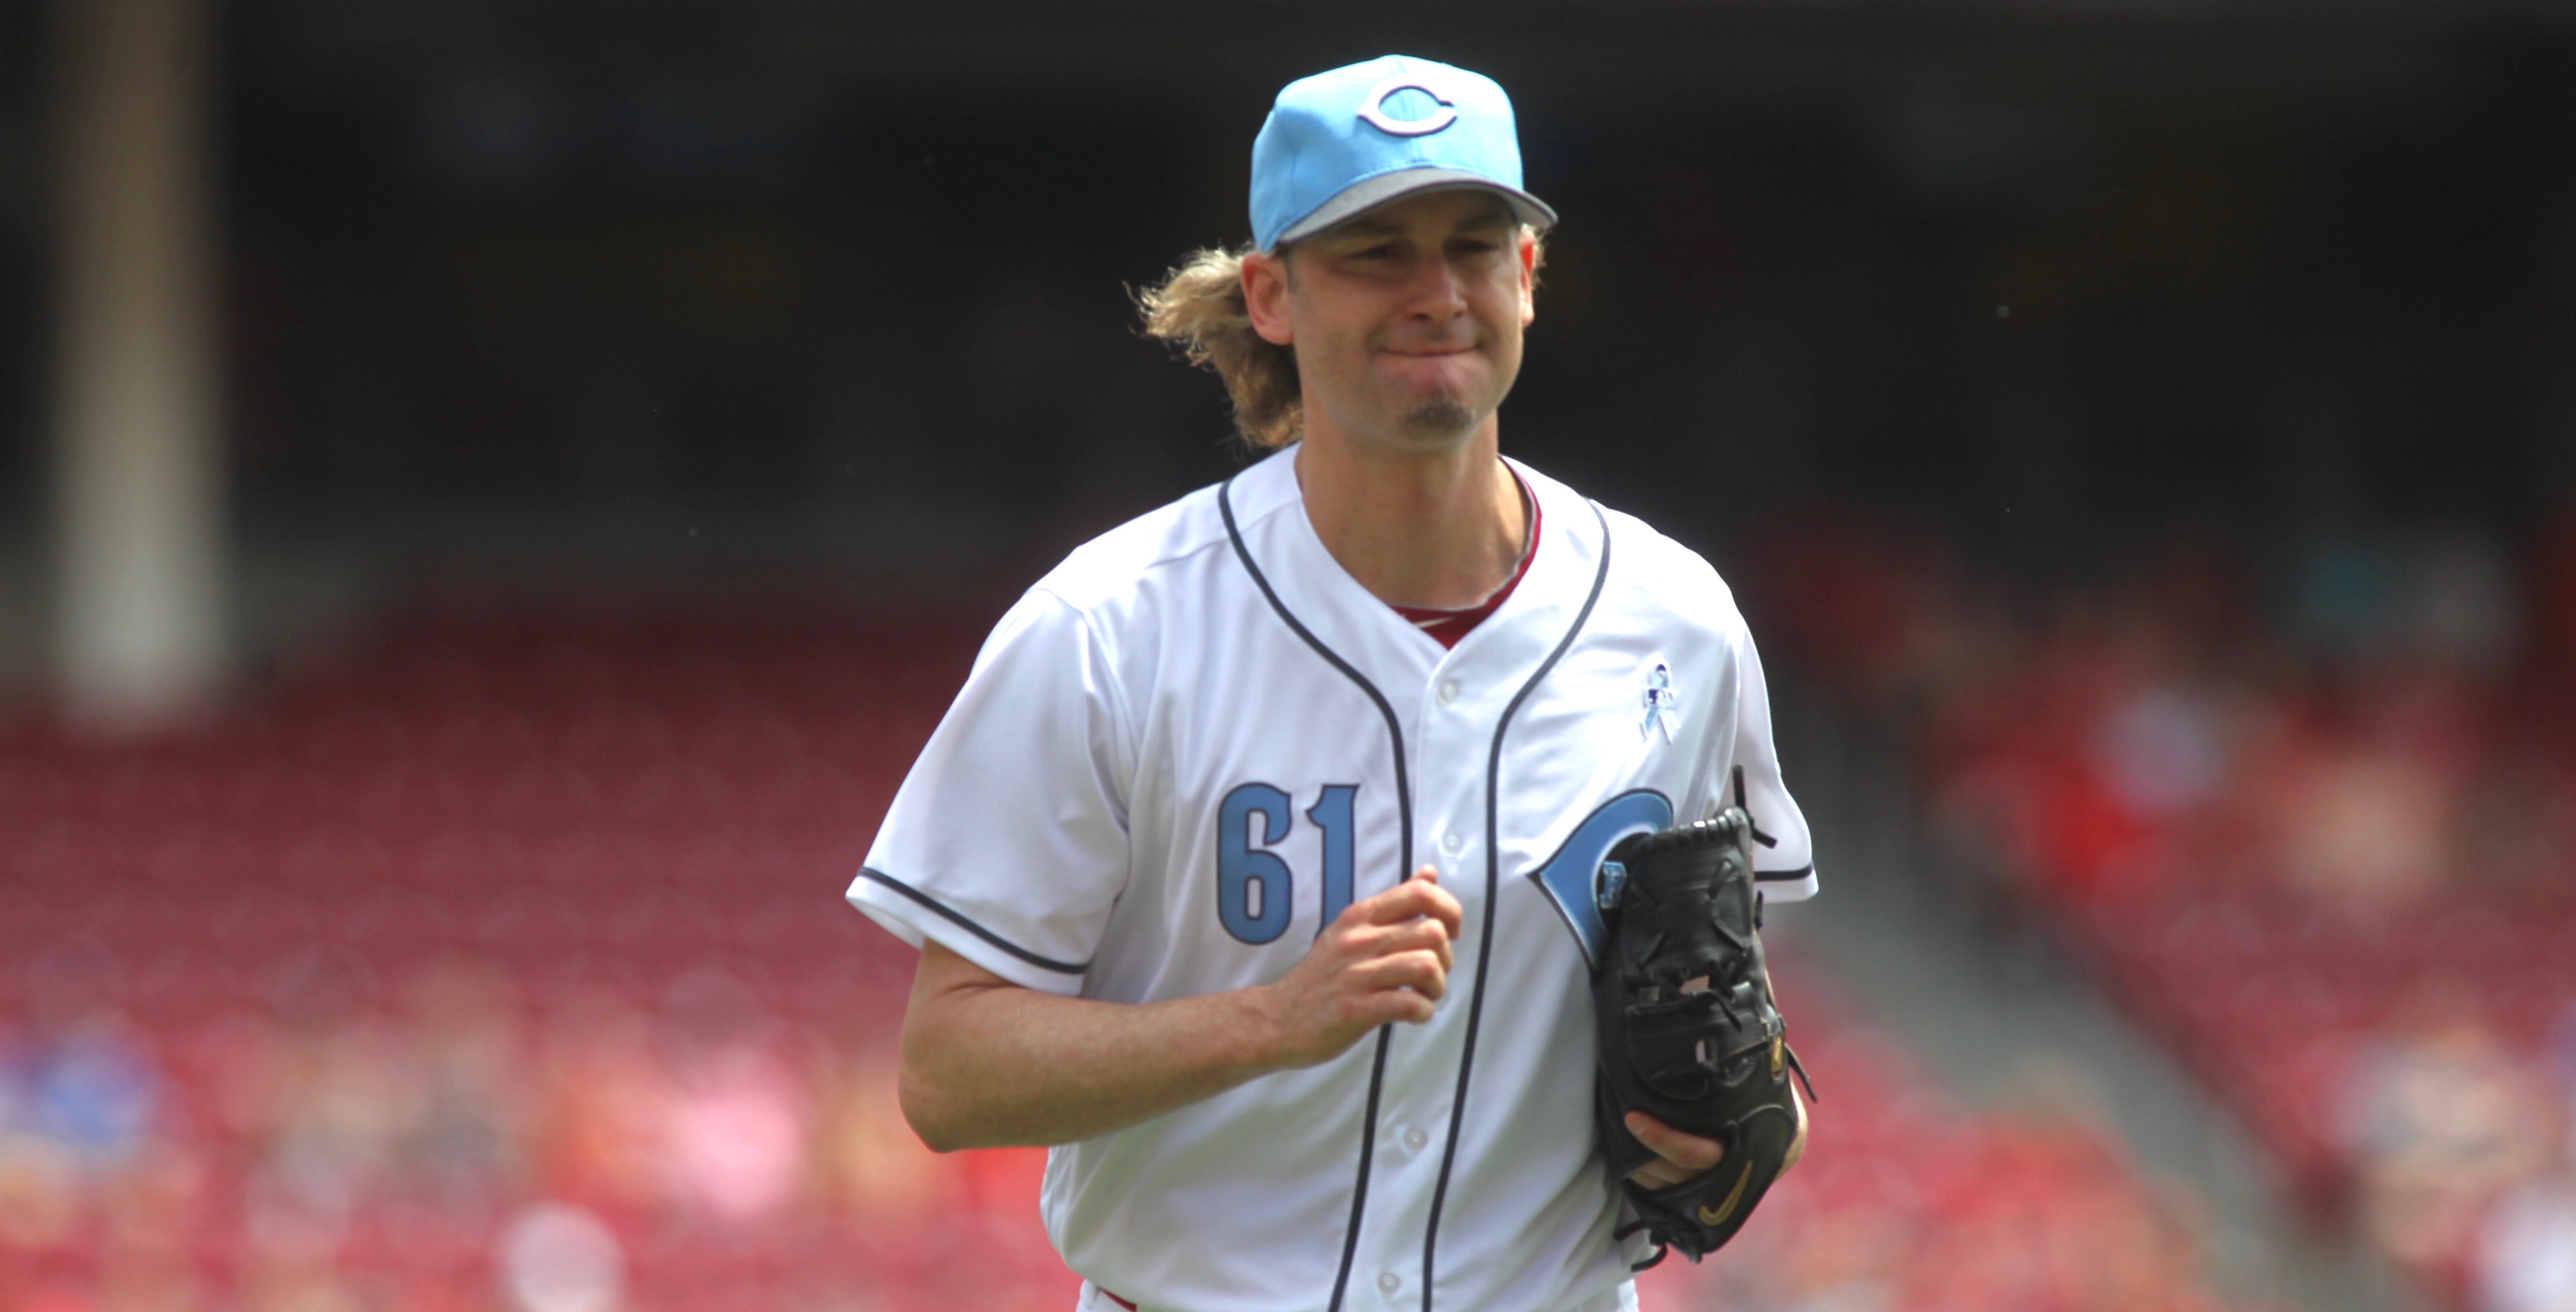 Bronson Arroyo to be inducted into Reds Hall of Fame